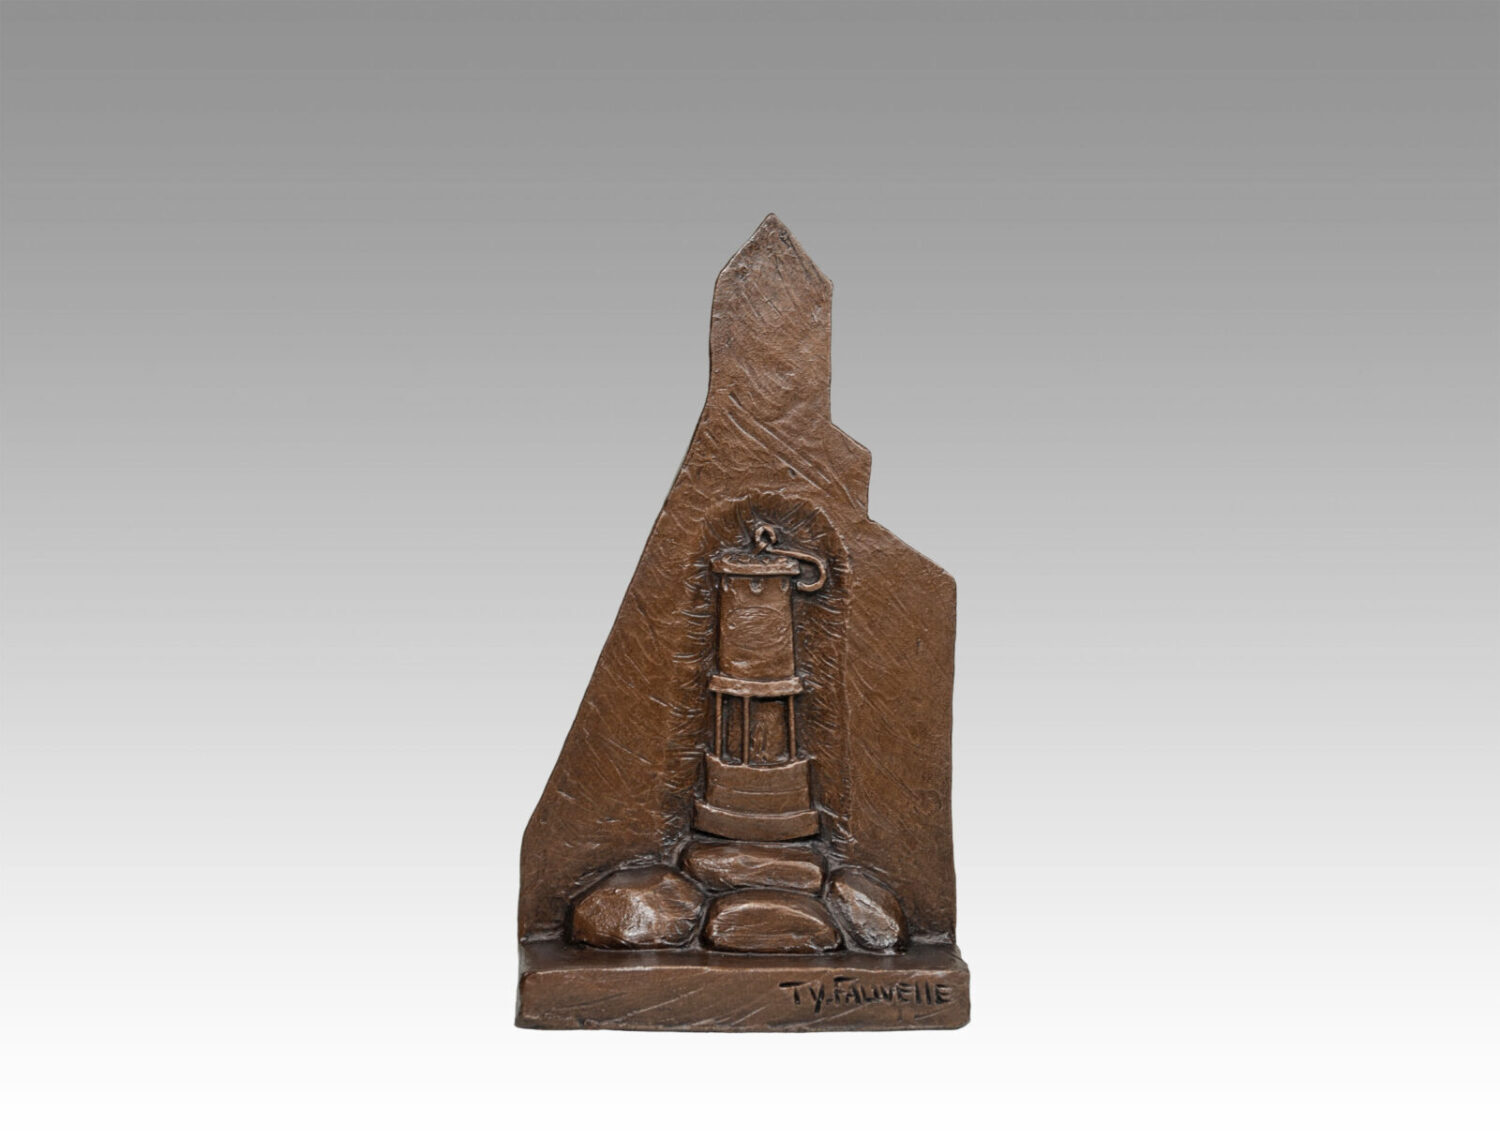 Gallery, Frame of Mine, $225 CAD, Metal Infused, 10 ½” H, Edition 80, Mining Sculpture of a Headframe with a sculptural relief of a miner's light and rock on the back, Sculptor Tyler Fauvelle